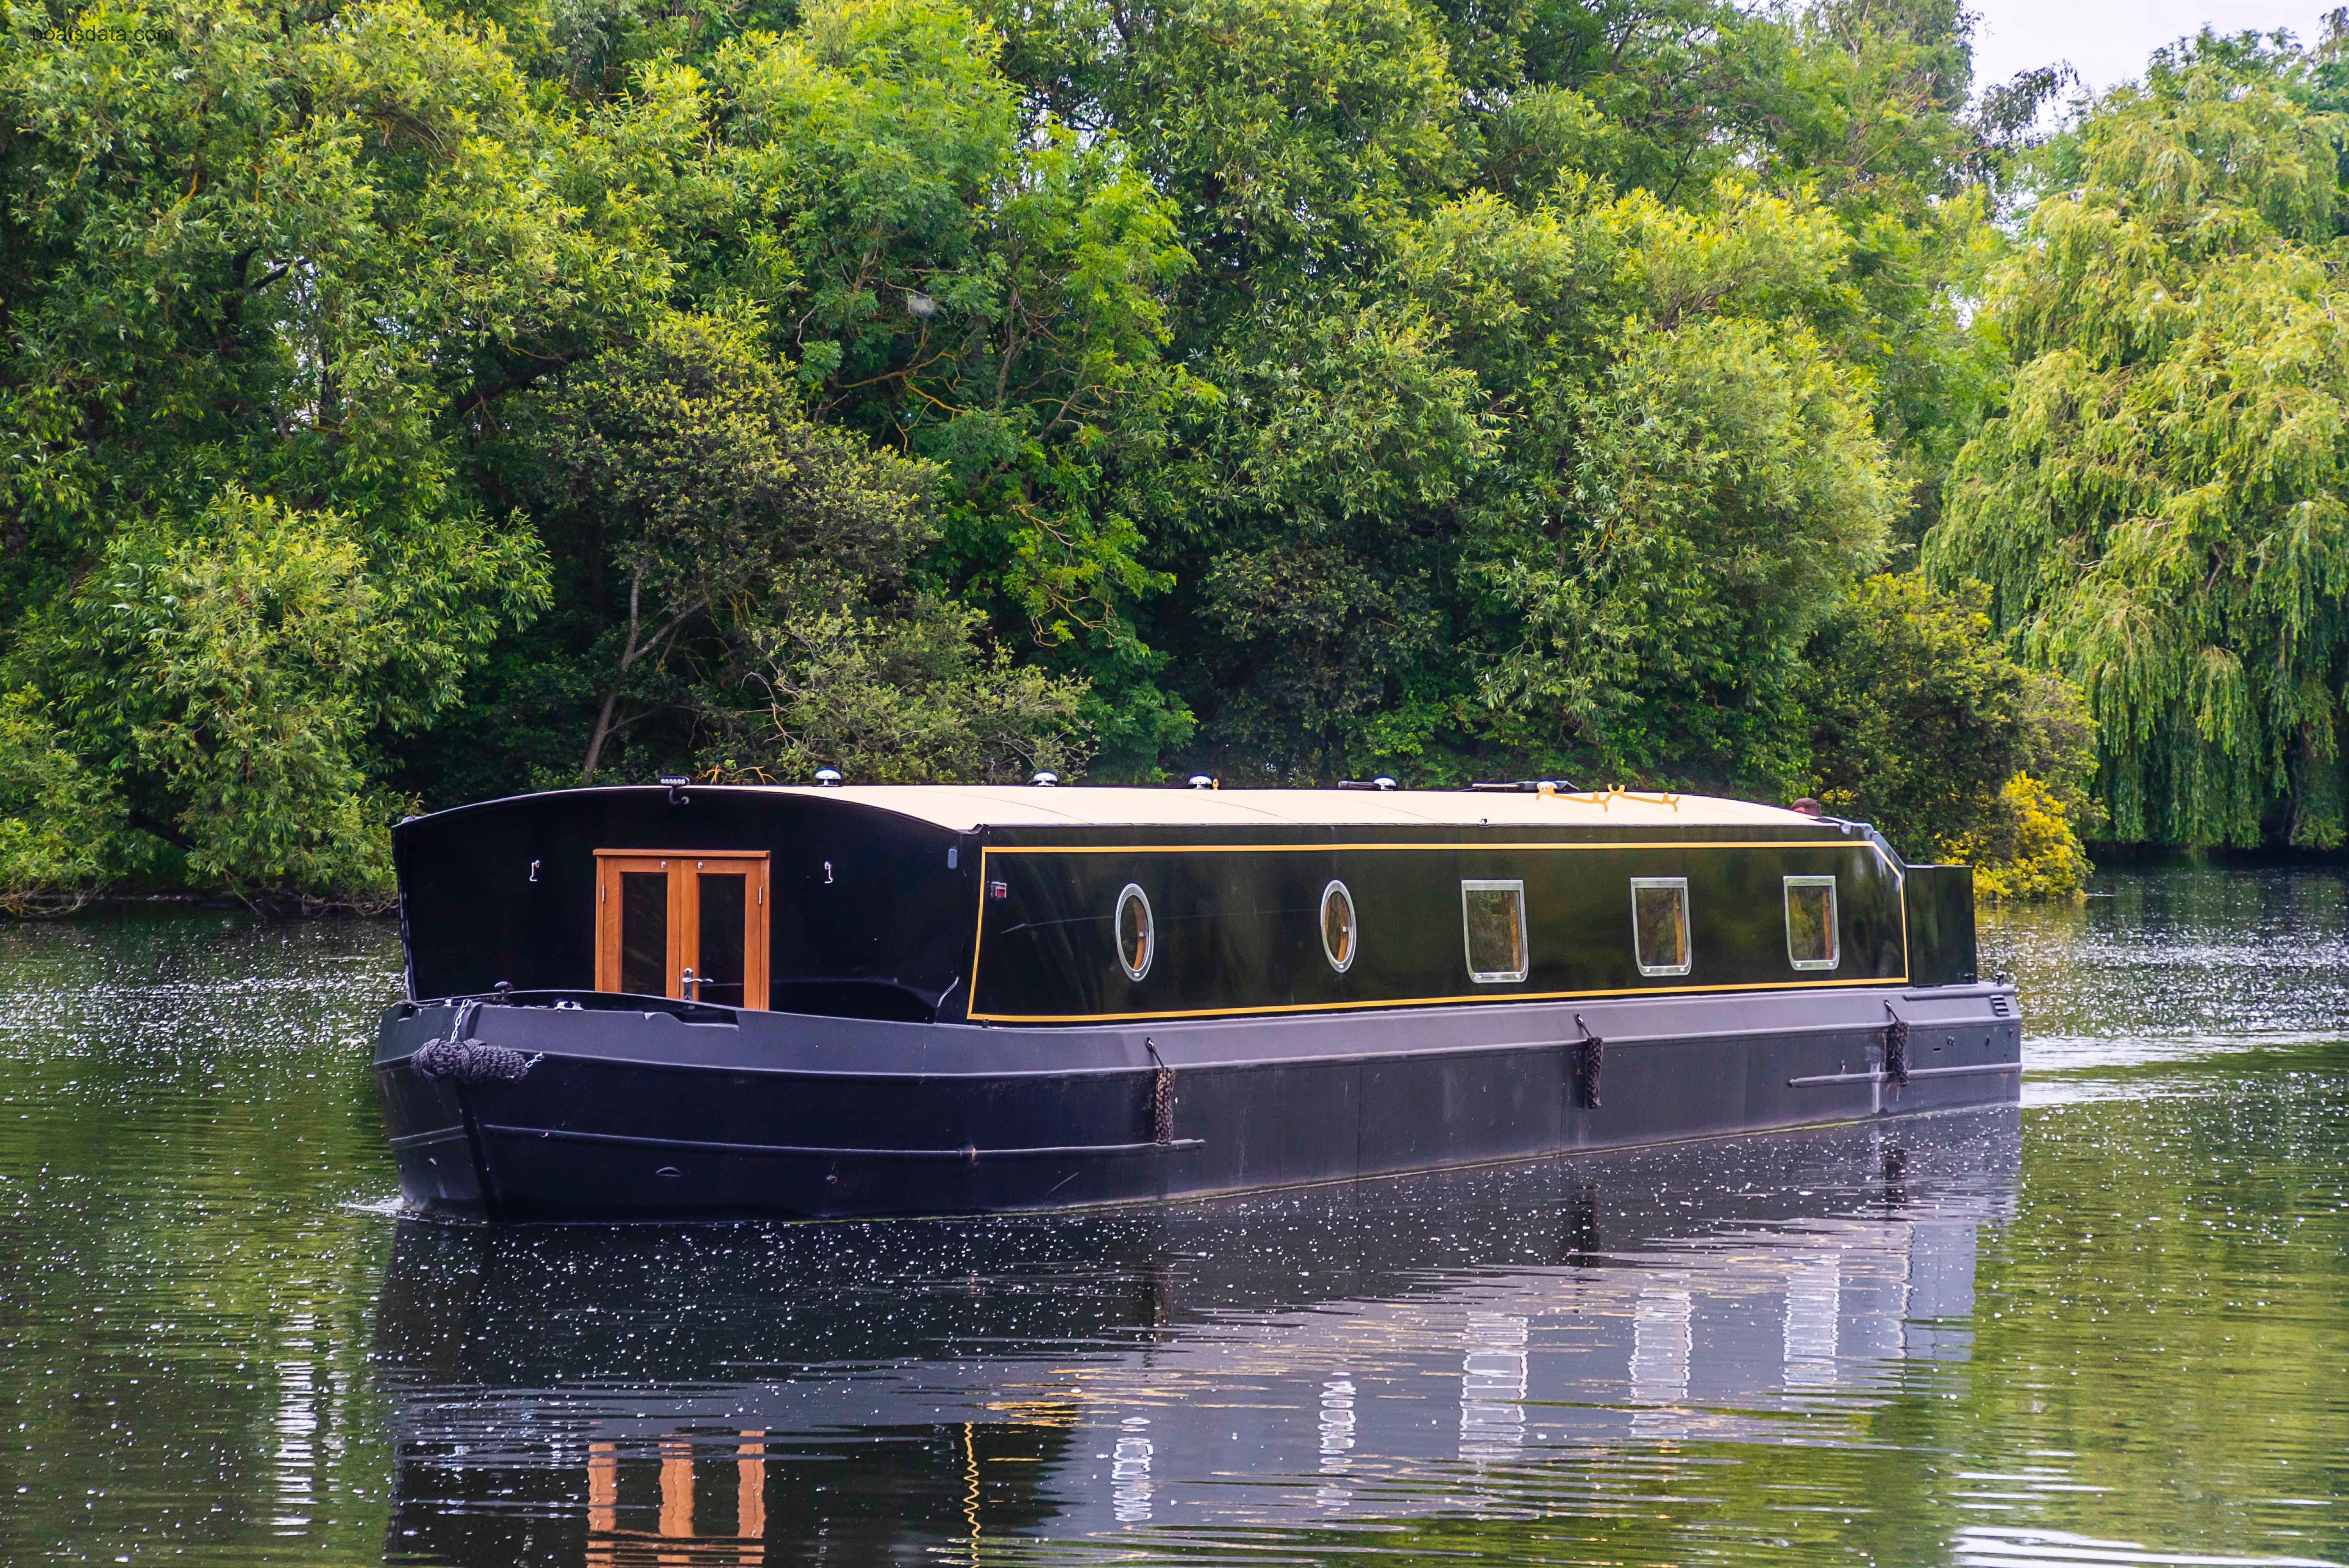 Wide Beam Narrowboat Colingwood 60 x 12 06 Sailaway tv detailed specifications and features